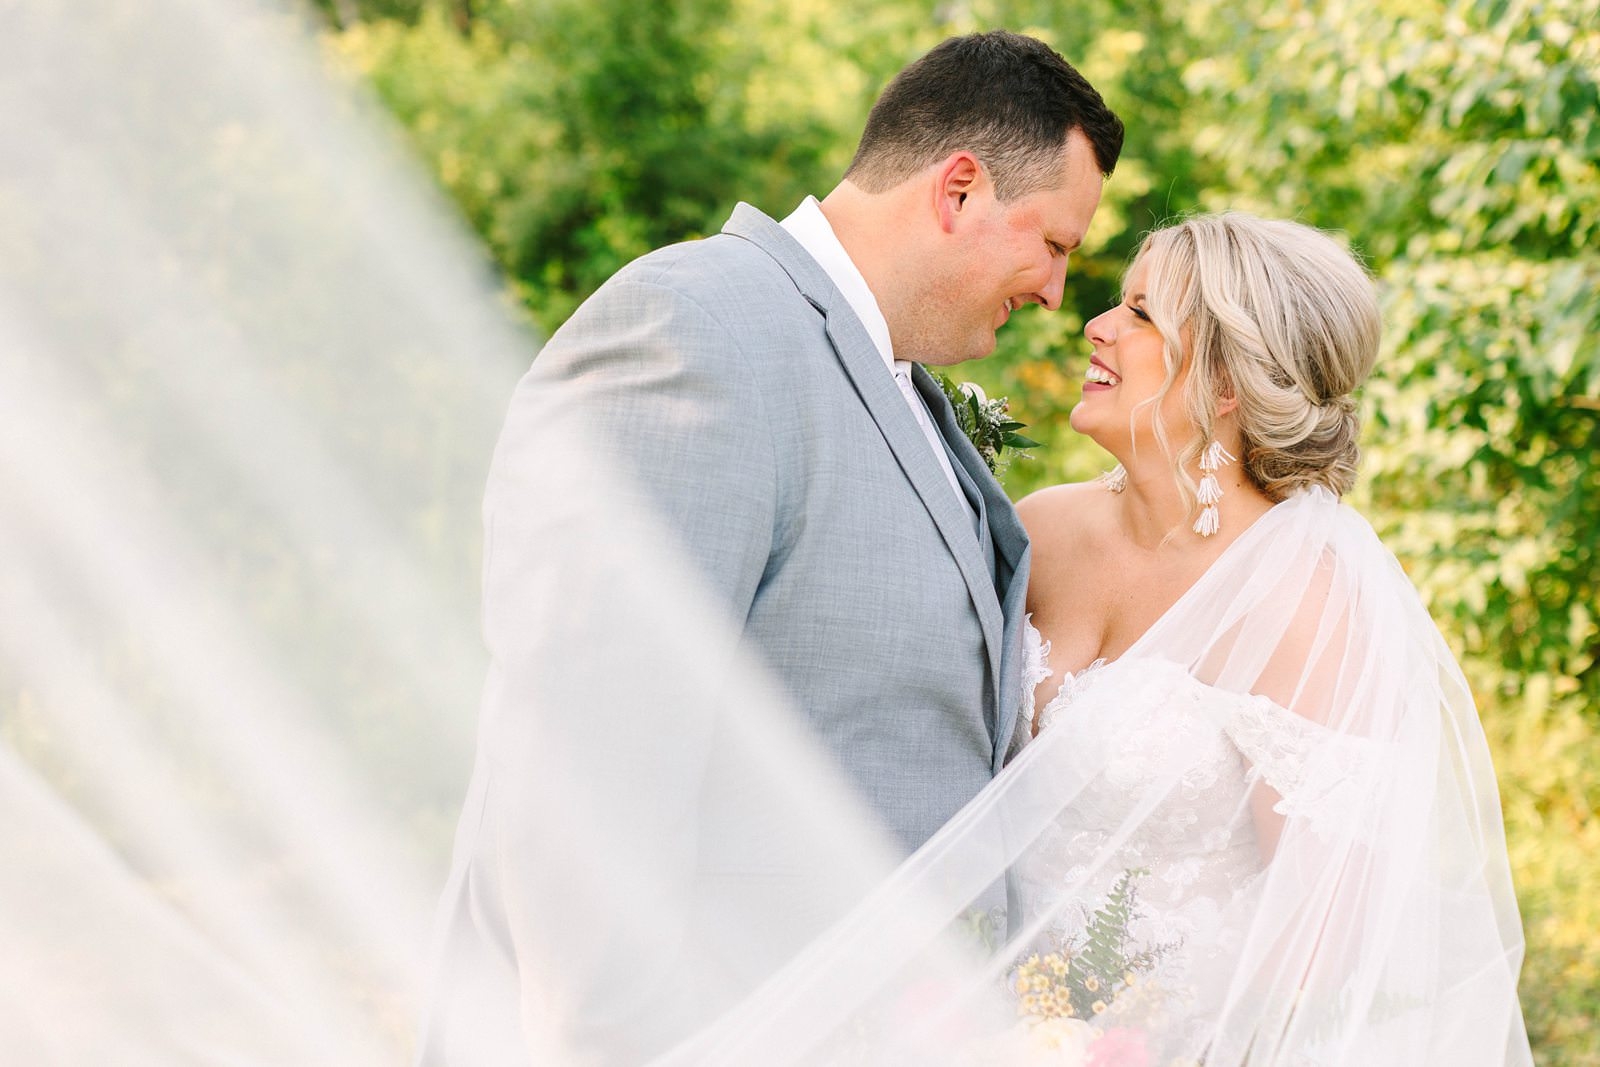 A Sunny Summer Wedding at Friedman Park in Newburgh Indiana | Paige and Dylan | Bret and Brandie Photography154.jpg